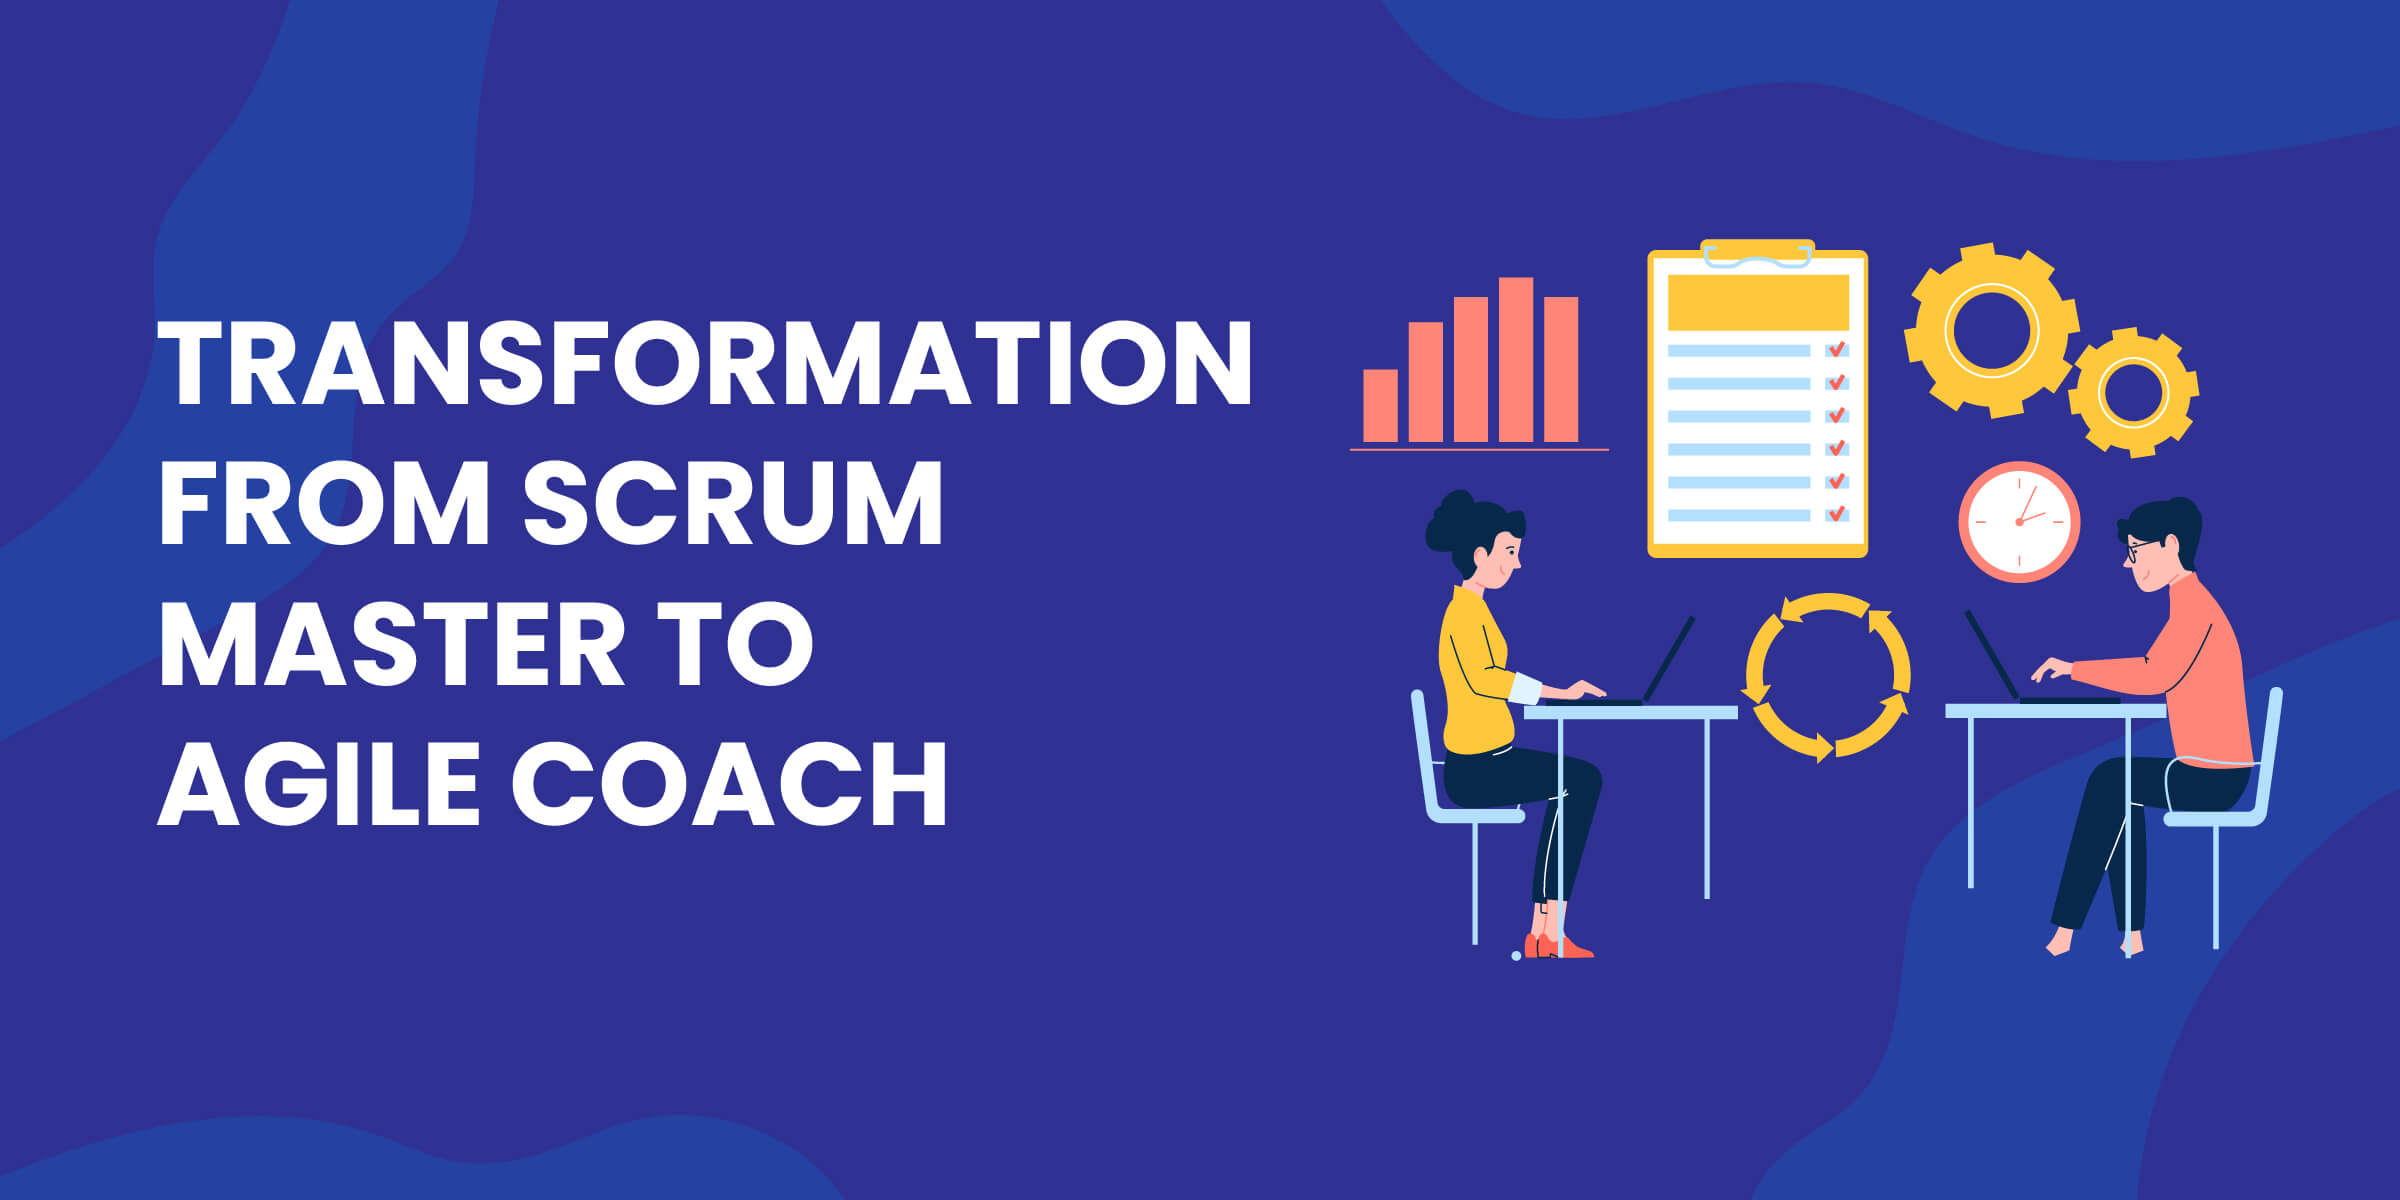 Transformation from Scrum Master to Agile Coach